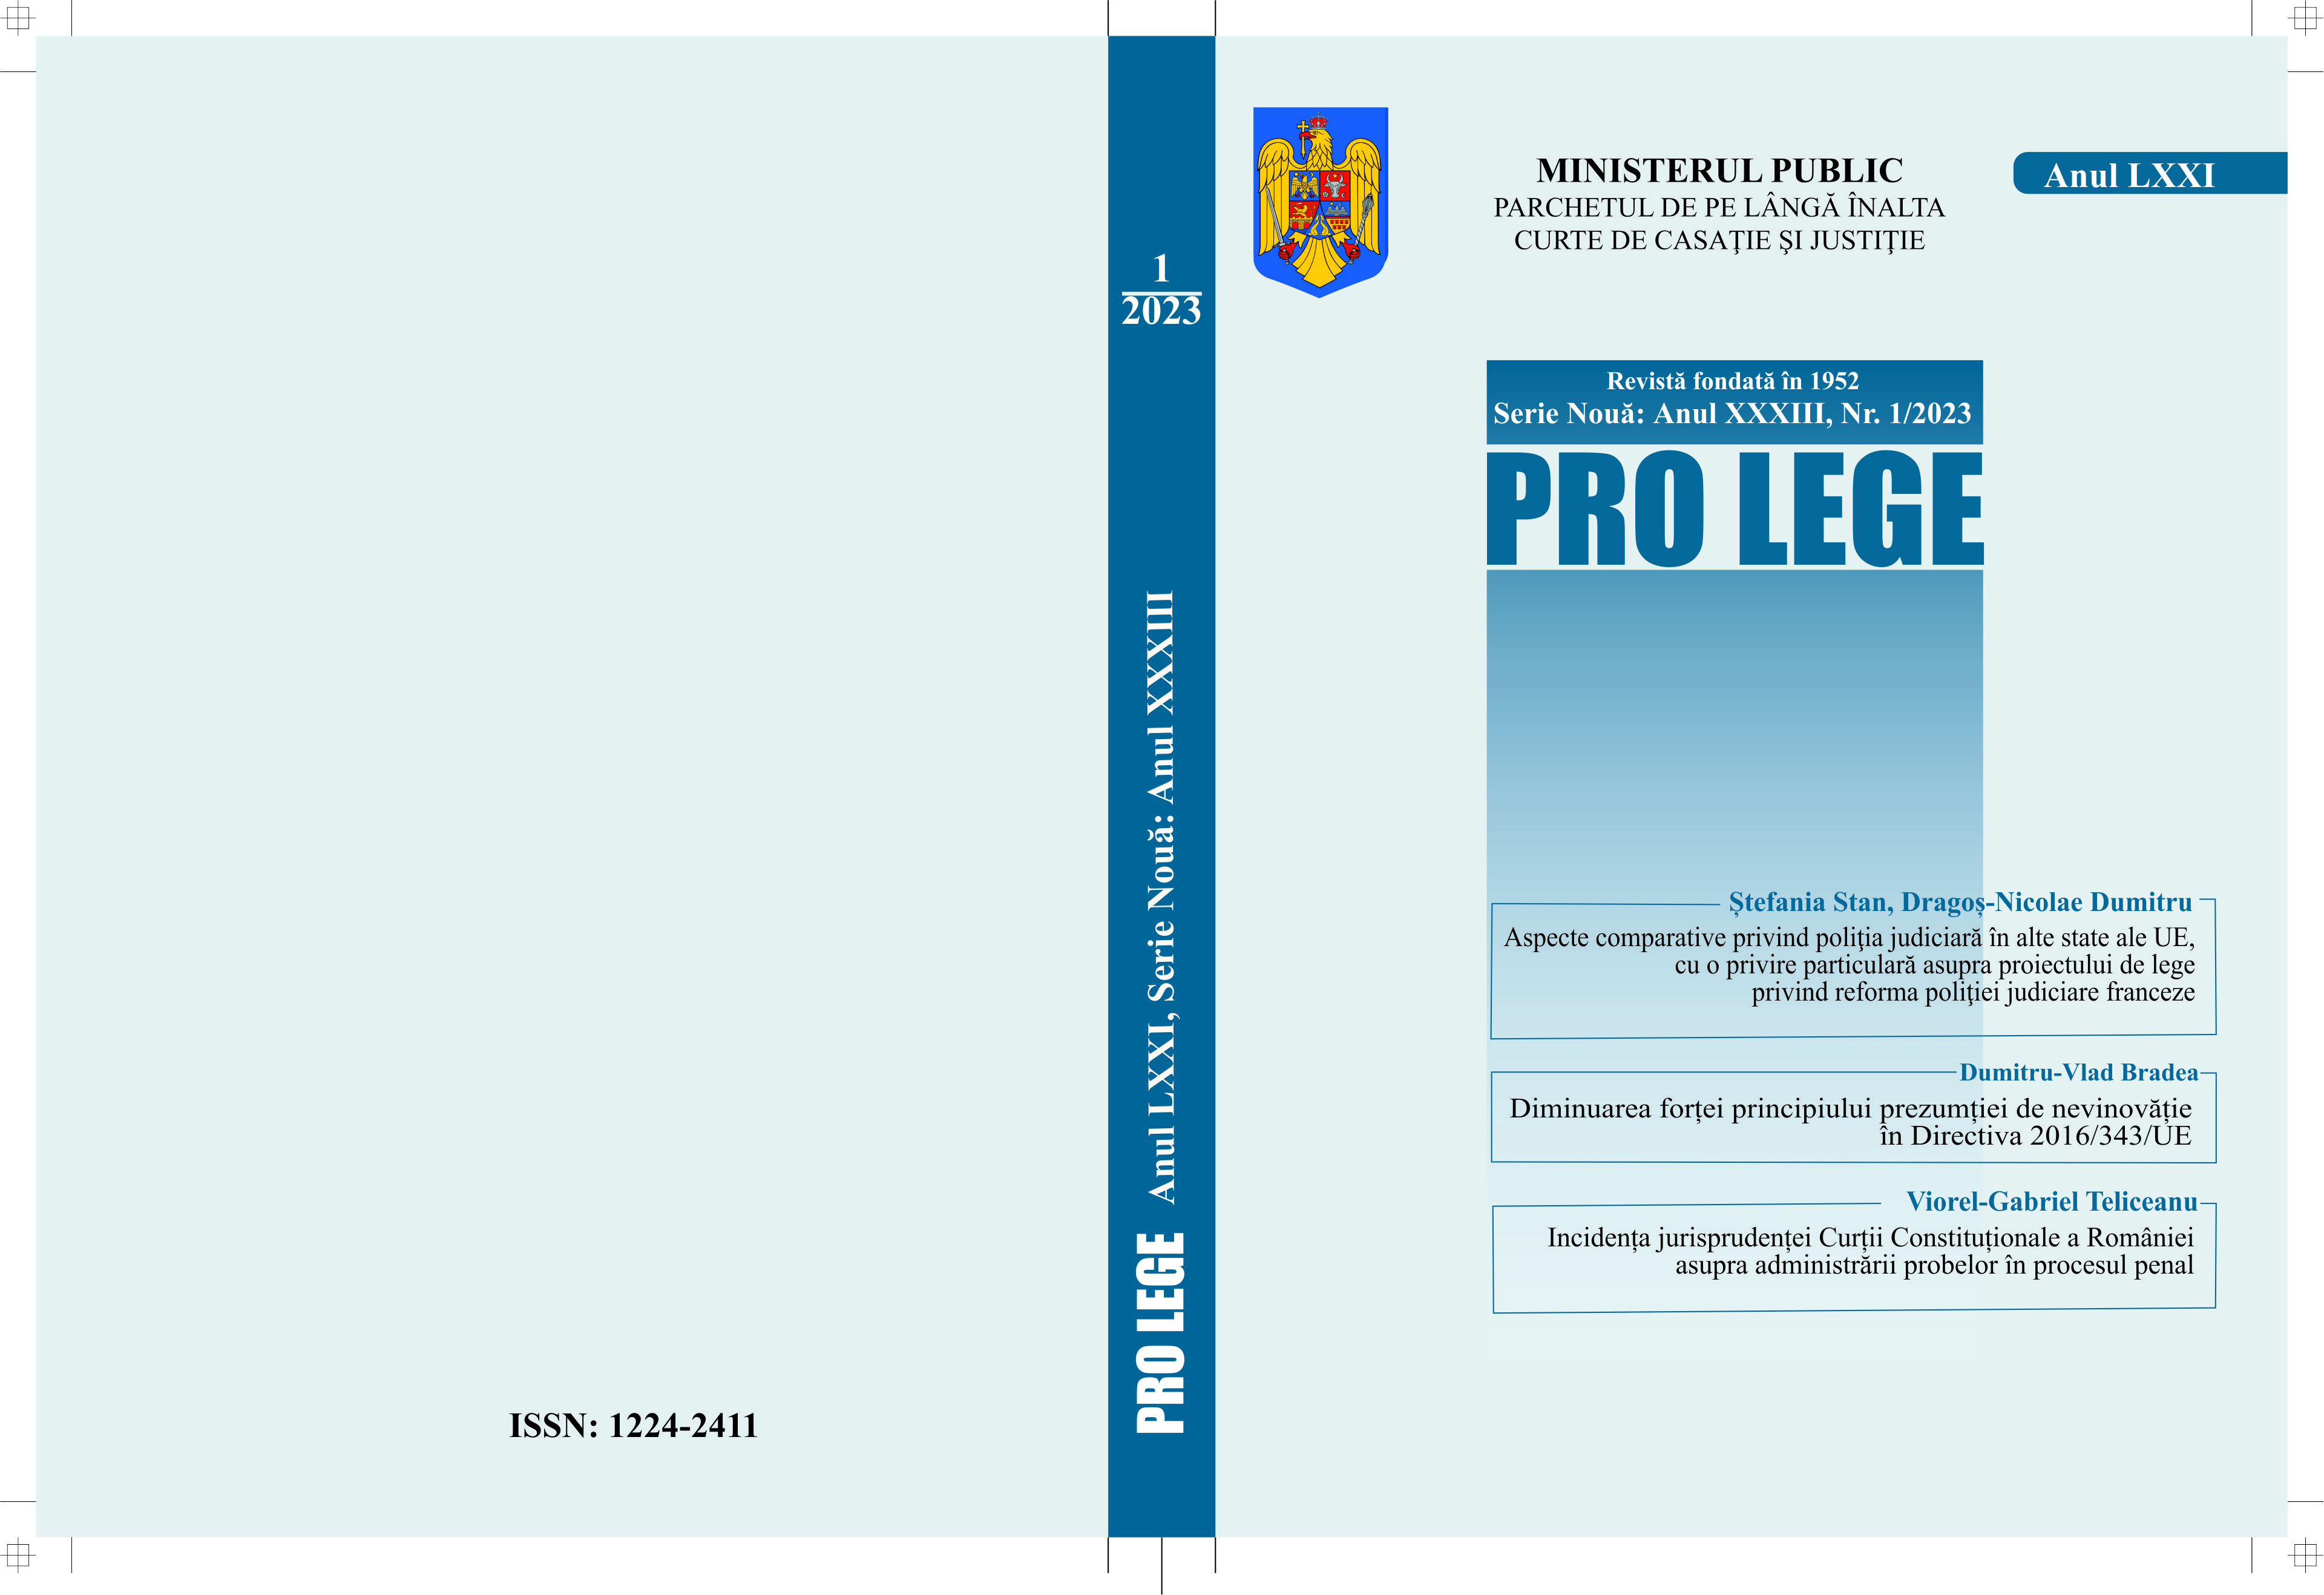 Decoration conferred in 1921 to presidents and general prosecutors from the Courts of Appeal in Cluj, Oradea-Mare, Târgu Mureș and Timișoara and from the Tribunal of Sibiu Cover Image